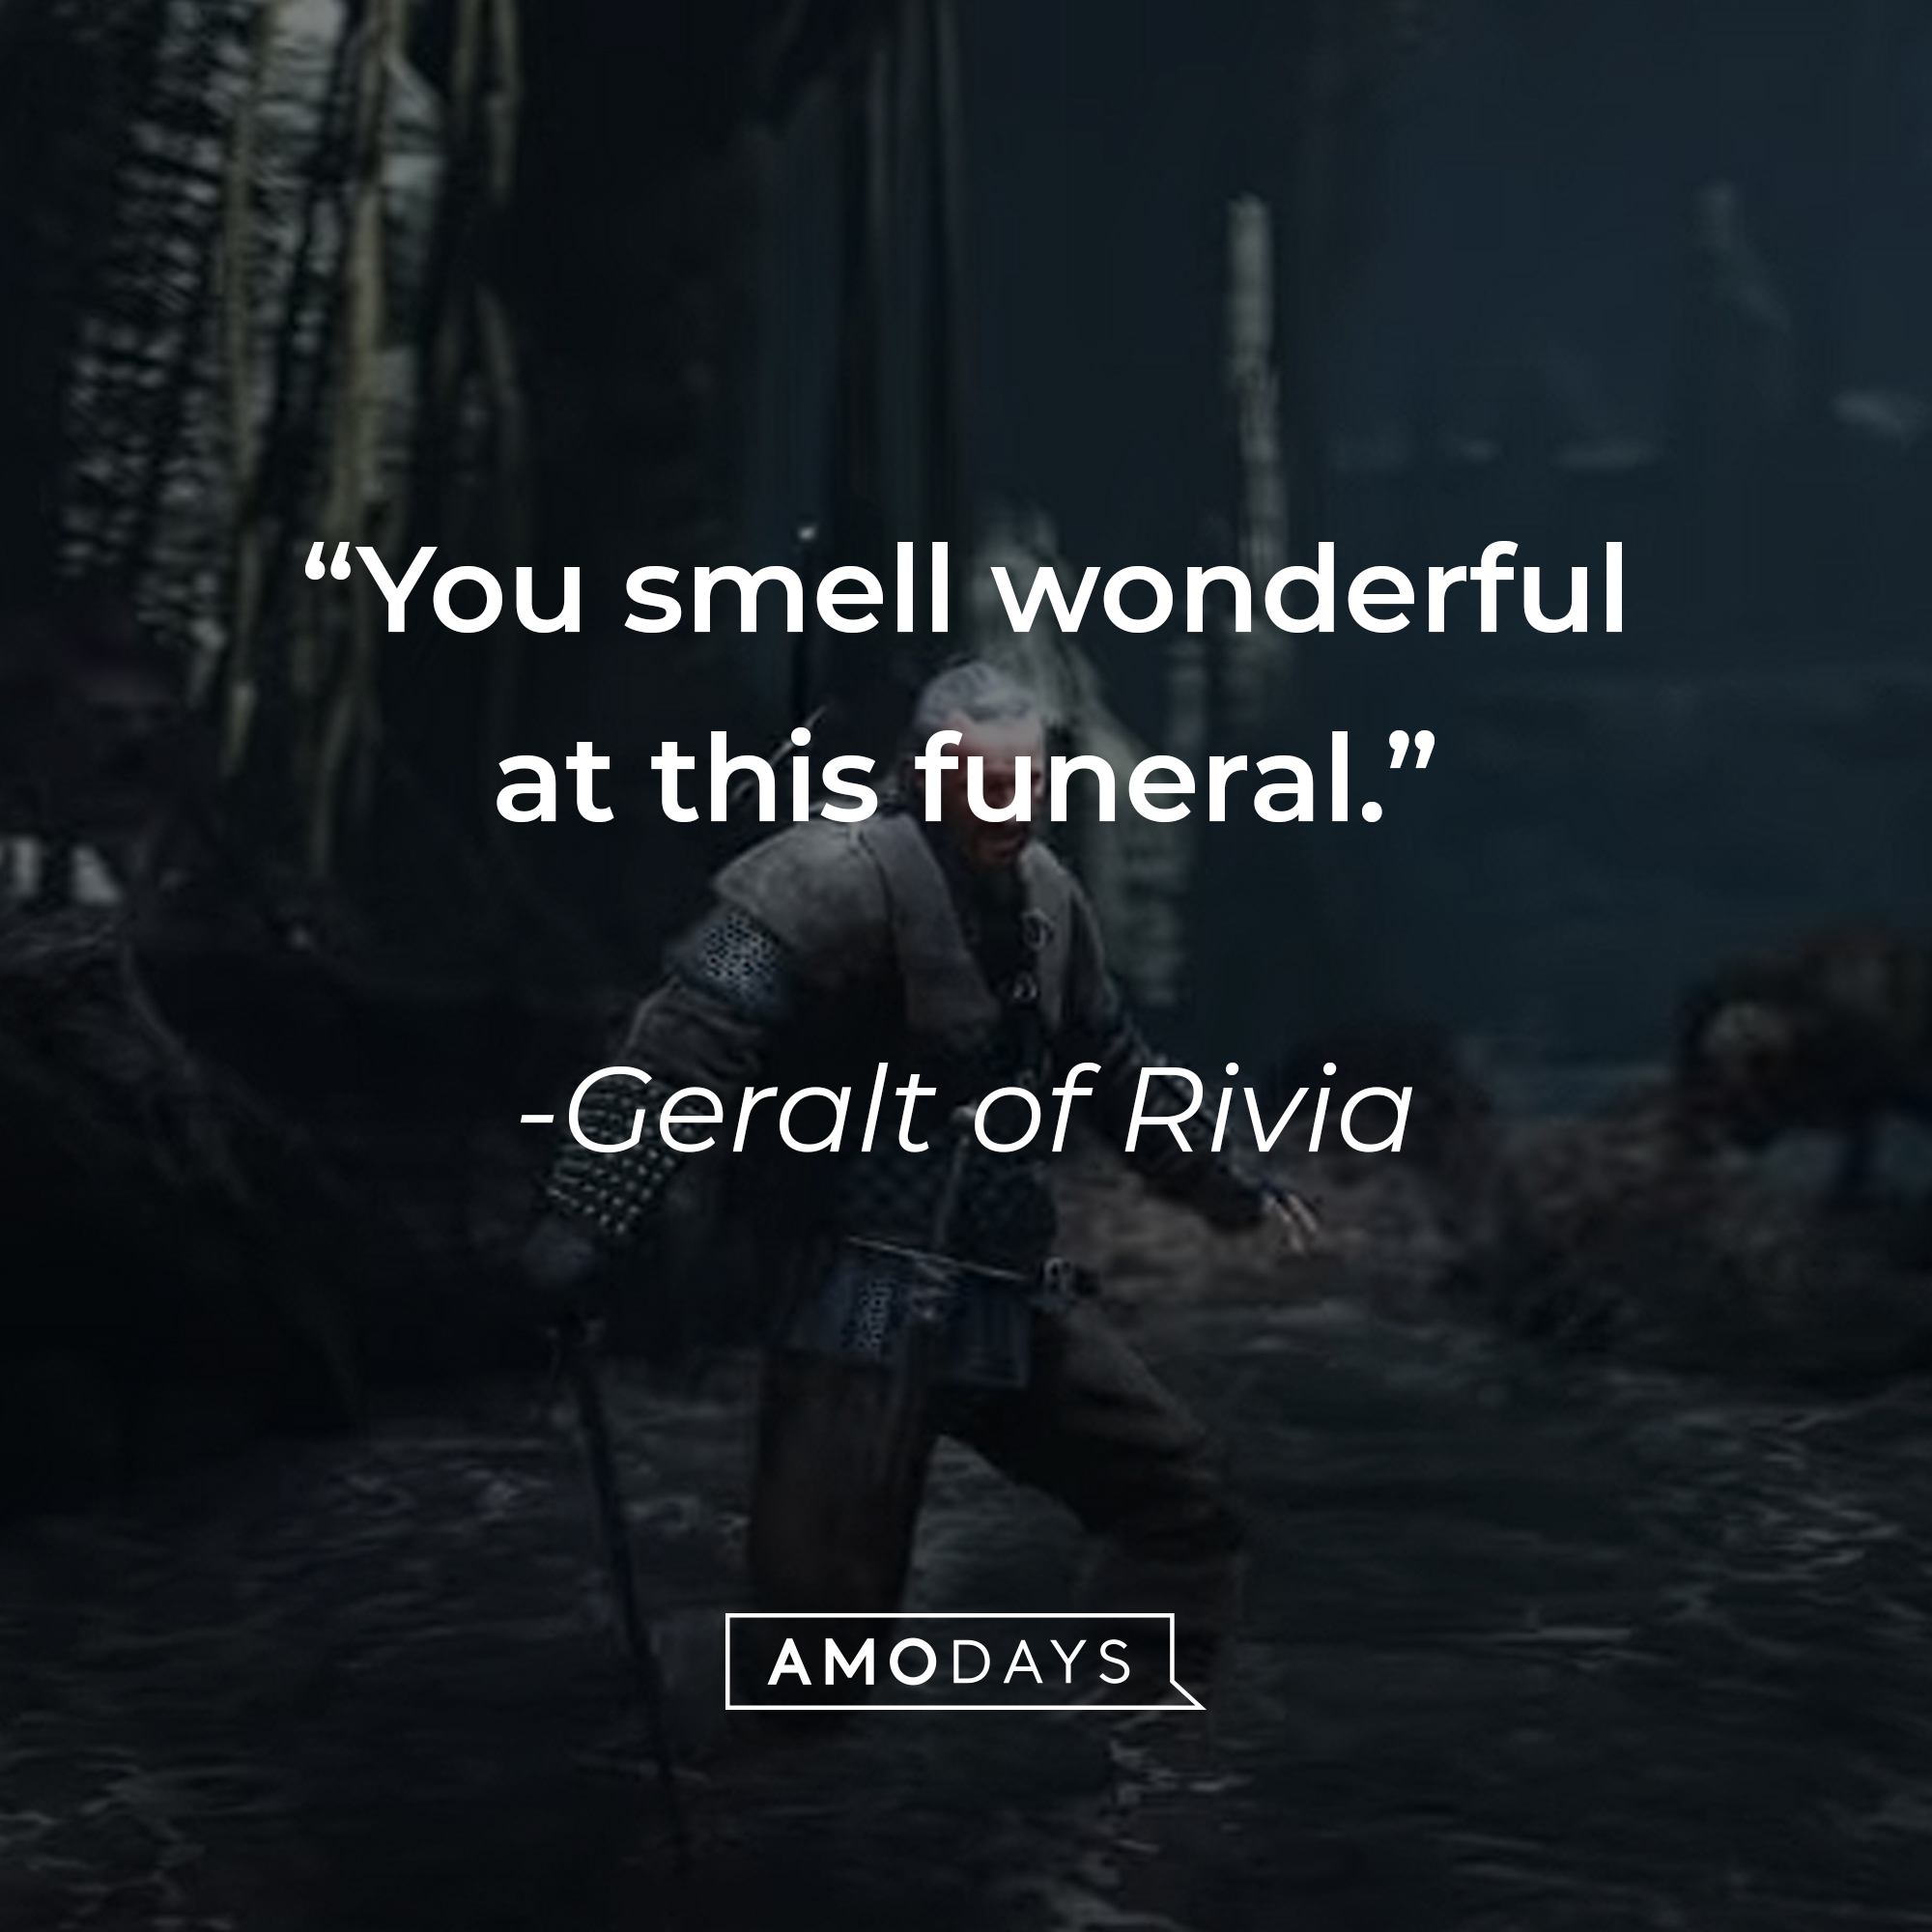 Geralt of Rivia's quote: "You smell wonderful at this funeral."  | Source: youtube.com/CDPRED